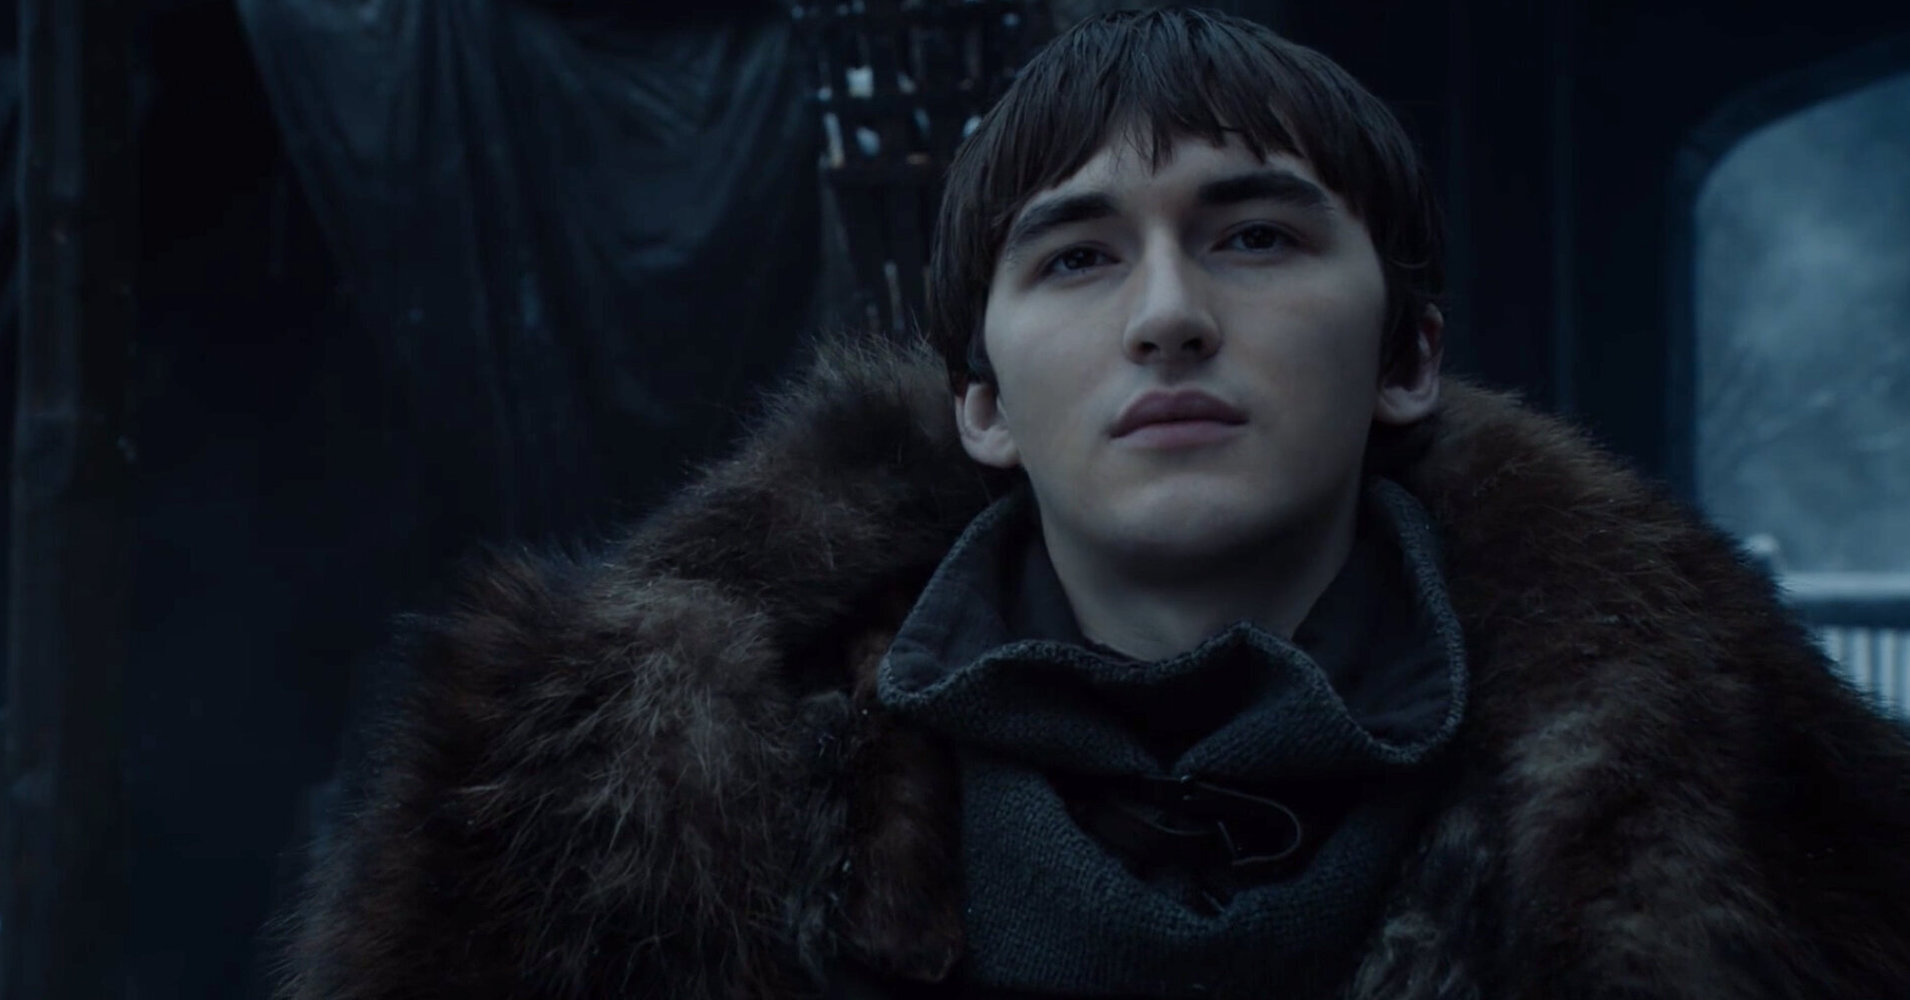 [Spoilers] Game of Thrones: Is Bran Stark really the Lord of Light, the Fire God?